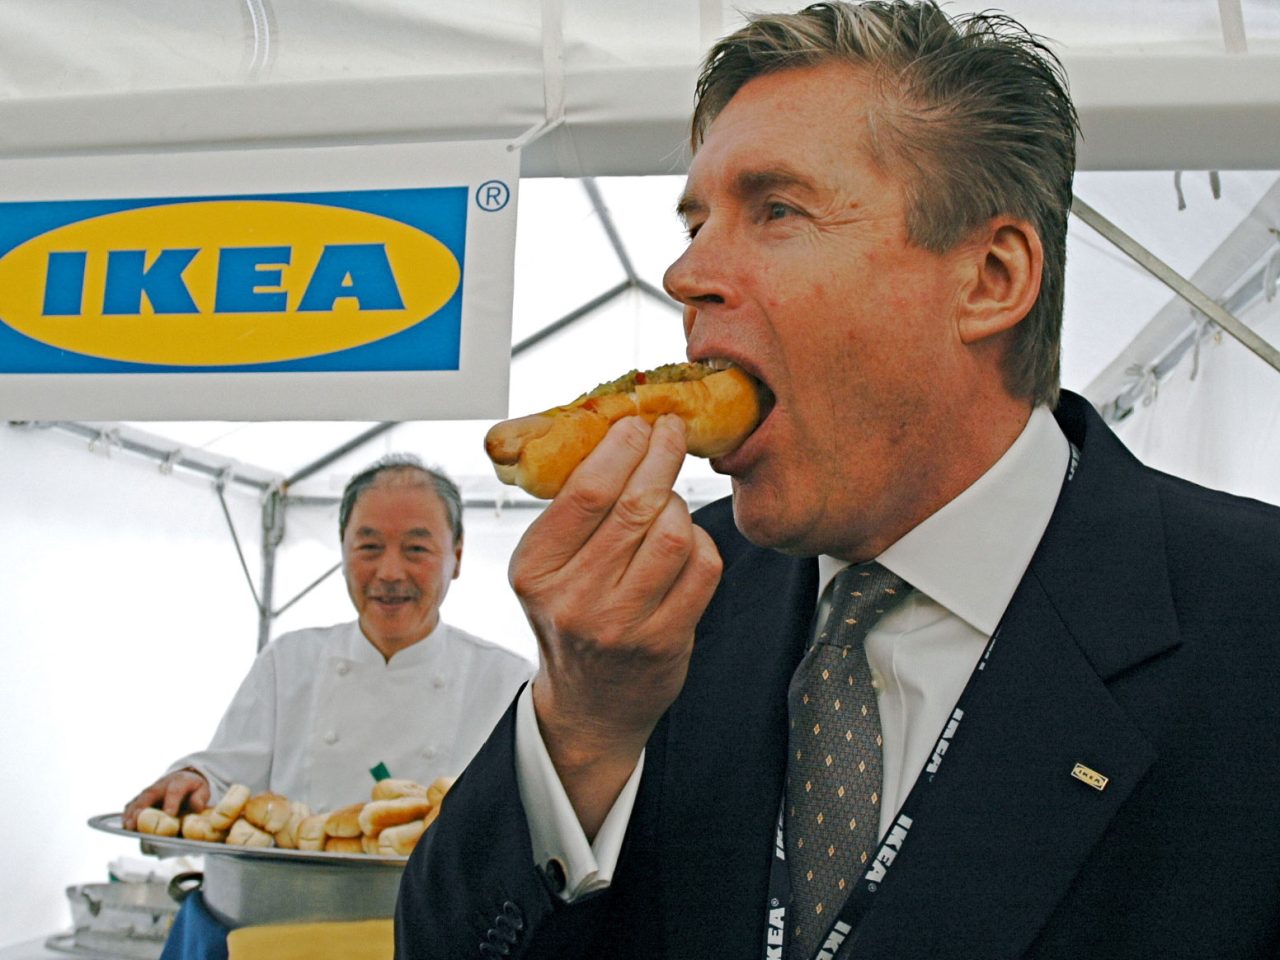 Man in dark suit and tie takes a big bite of a hot dog, in the background a smiling Japanese chef and an IKEA sign.